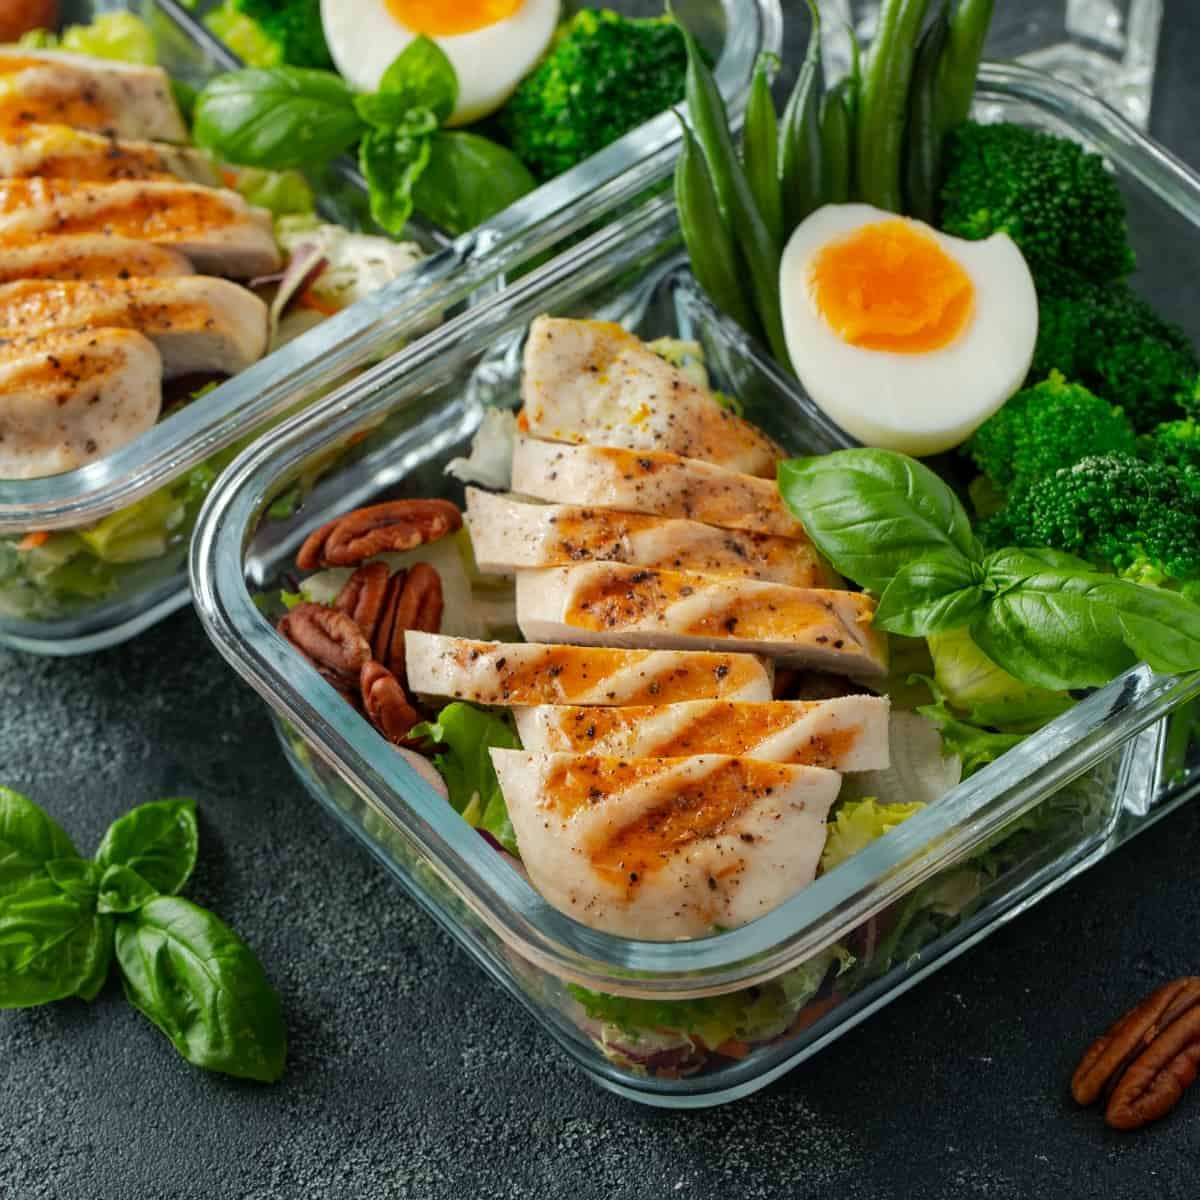 10+ Healthy Meal Prep Ideas for Weight Loss on Keto